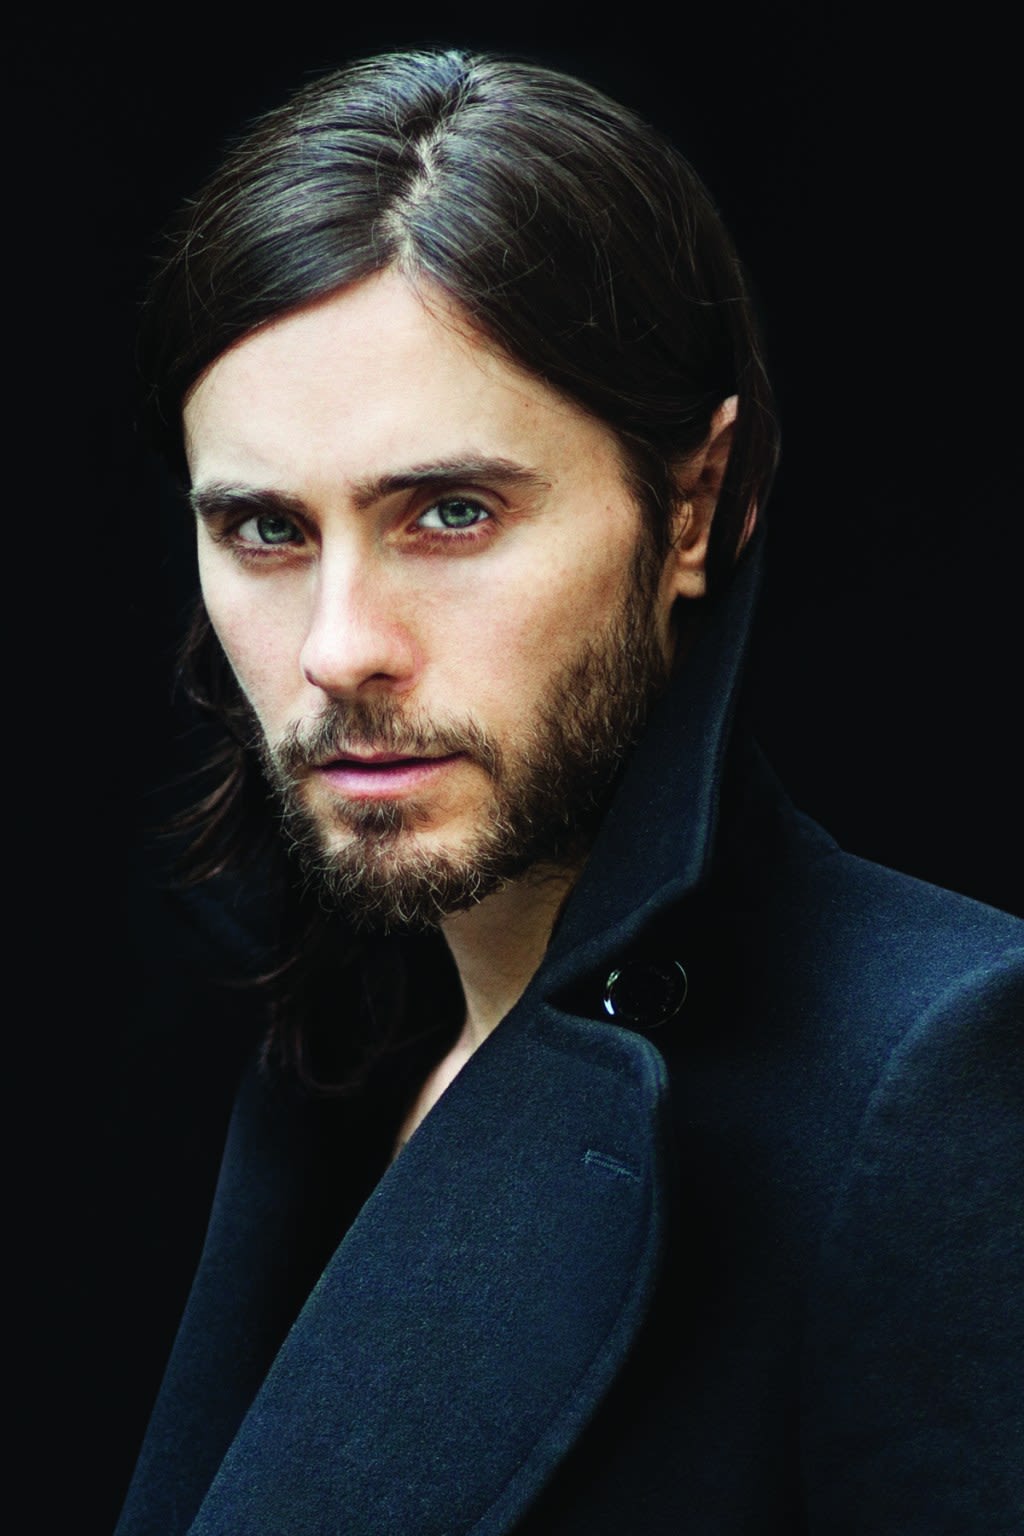 Jared Leto To Produce, Star In H.wood Media Film Inspired By Professor-Turned-Cat Burglar Suspect Dr. Lawrence Gray